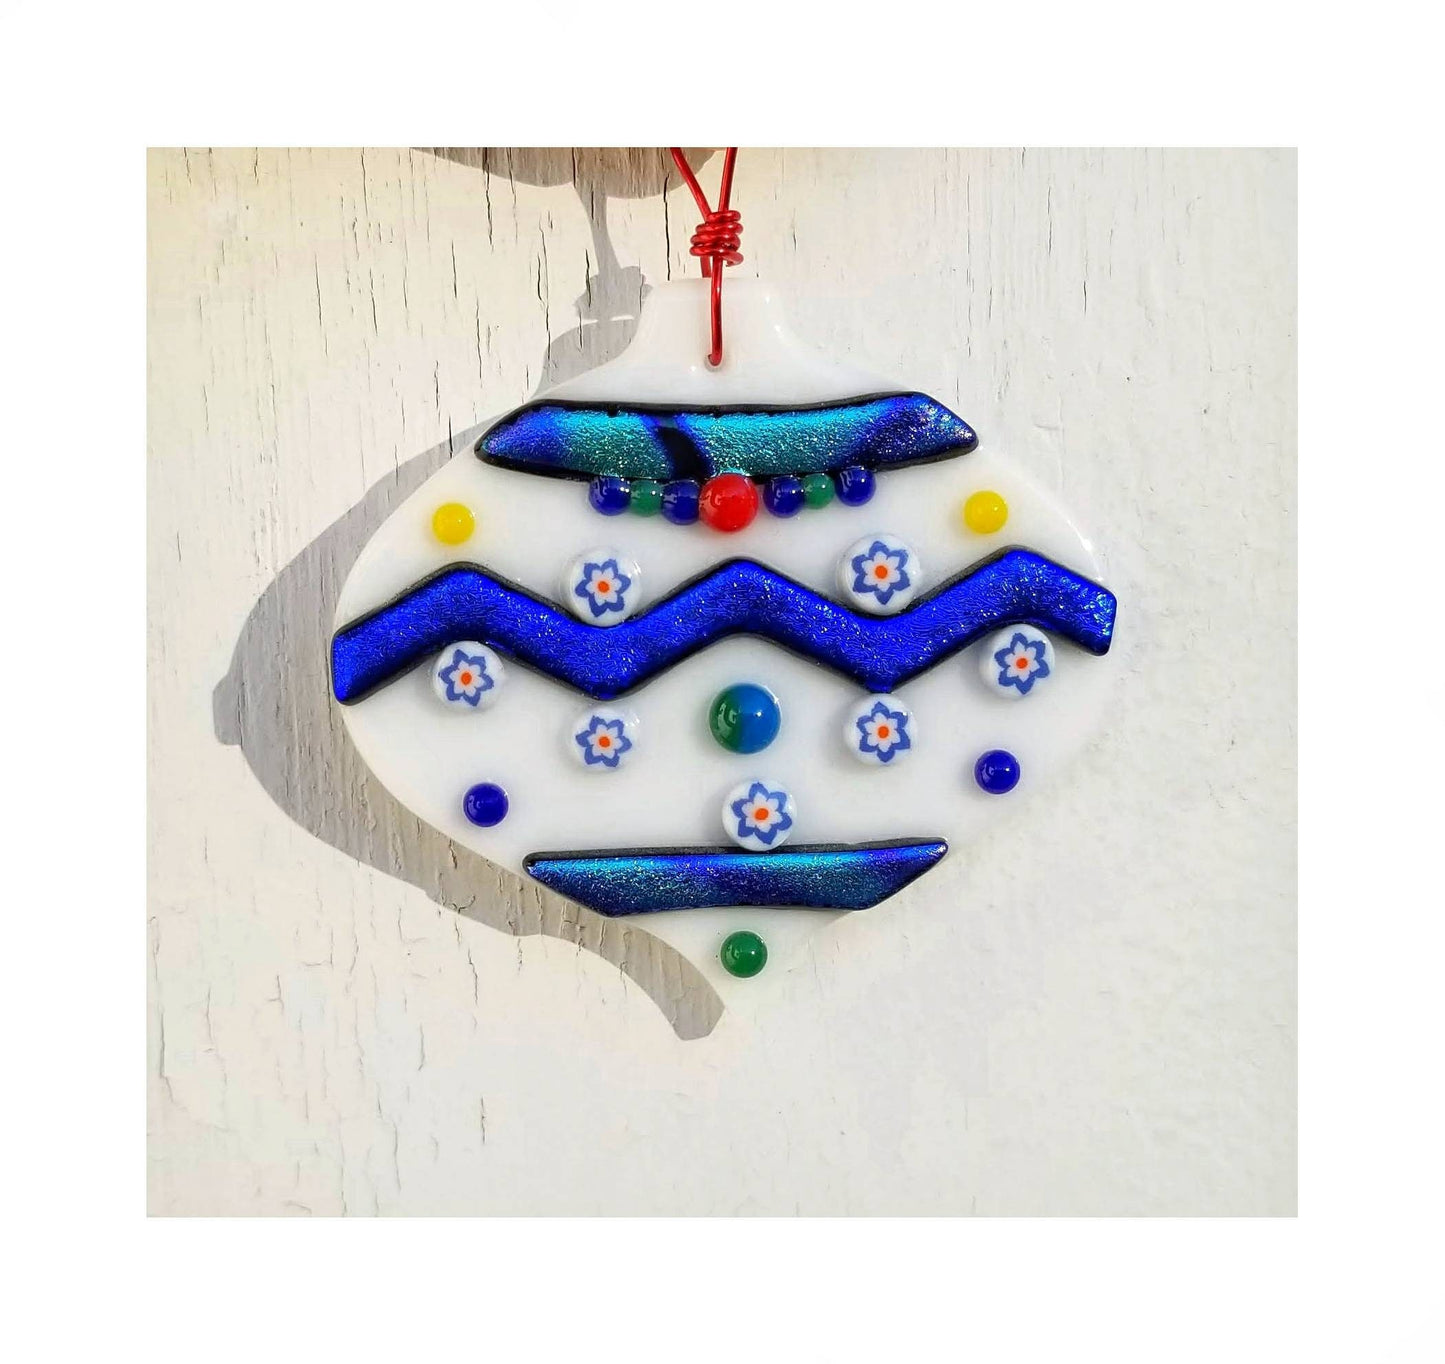 Fused Glass Ornaments. Blue, White & Crushed Glass Decorations. Gift Tags, Set of 2. Small gifts for saying thank you.